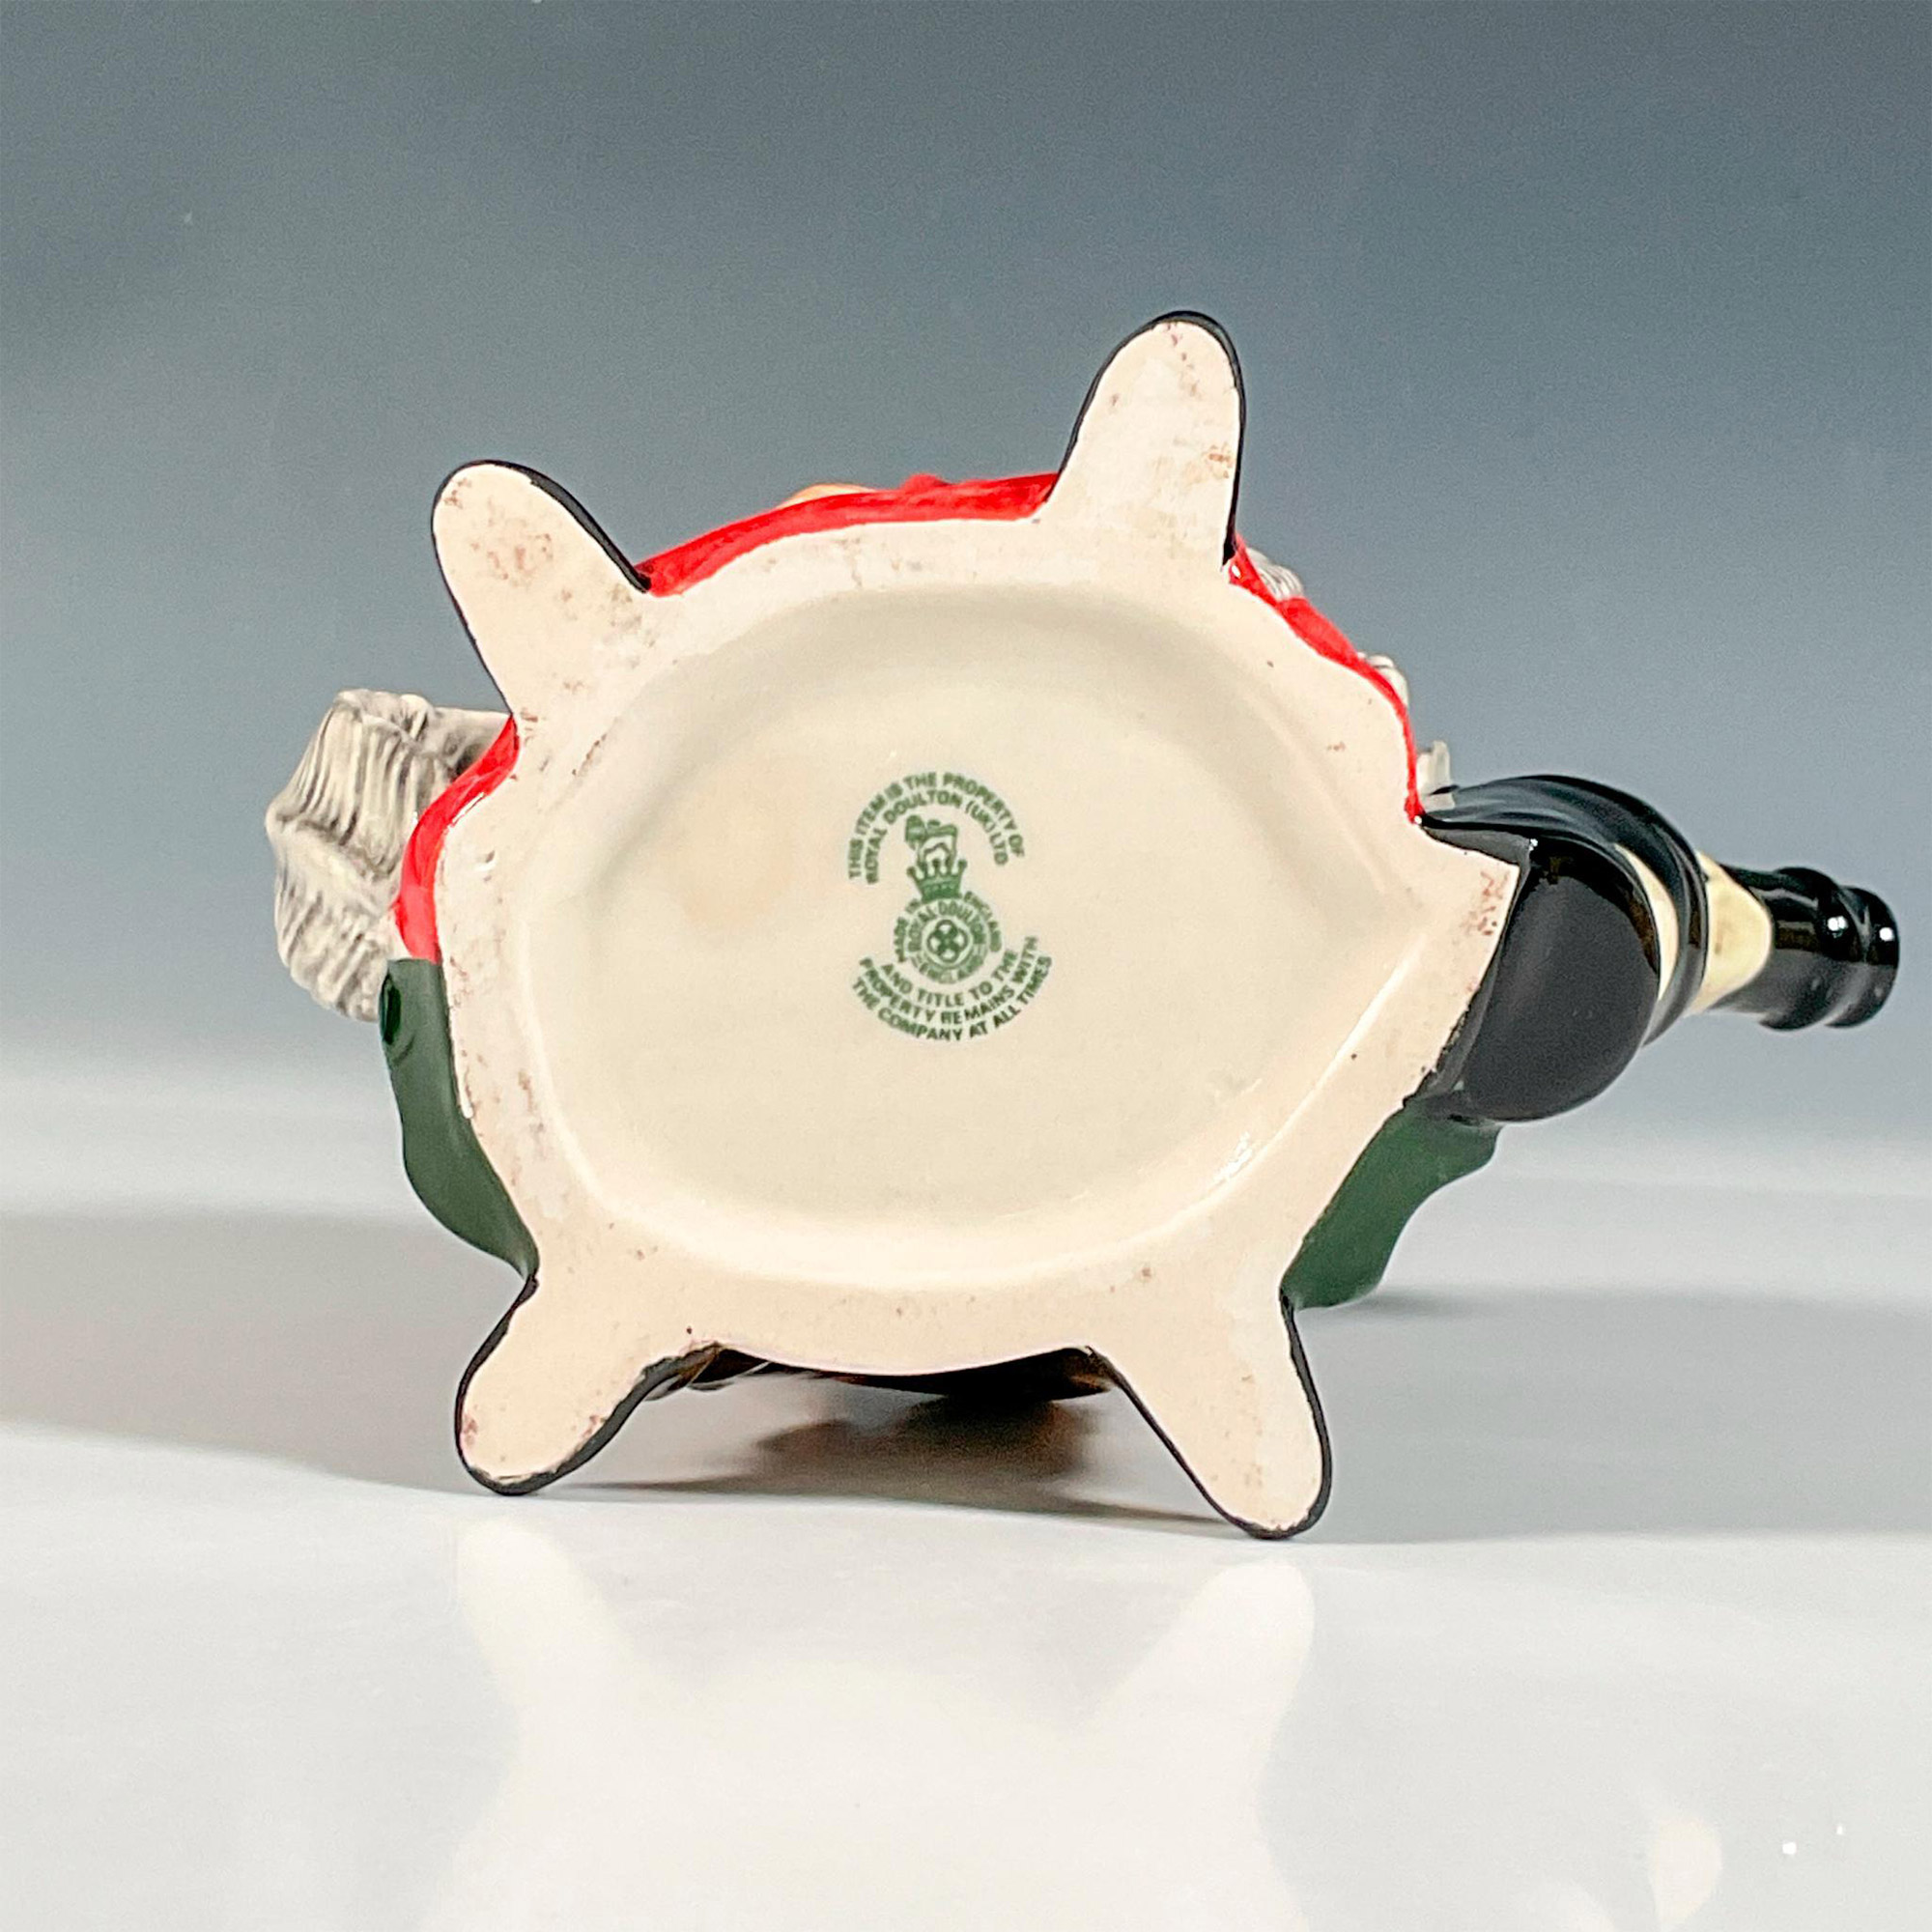 Royal Doulton Prototype Colorway Teapot, Sodden and Sobriety D7184 - Image 3 of 3